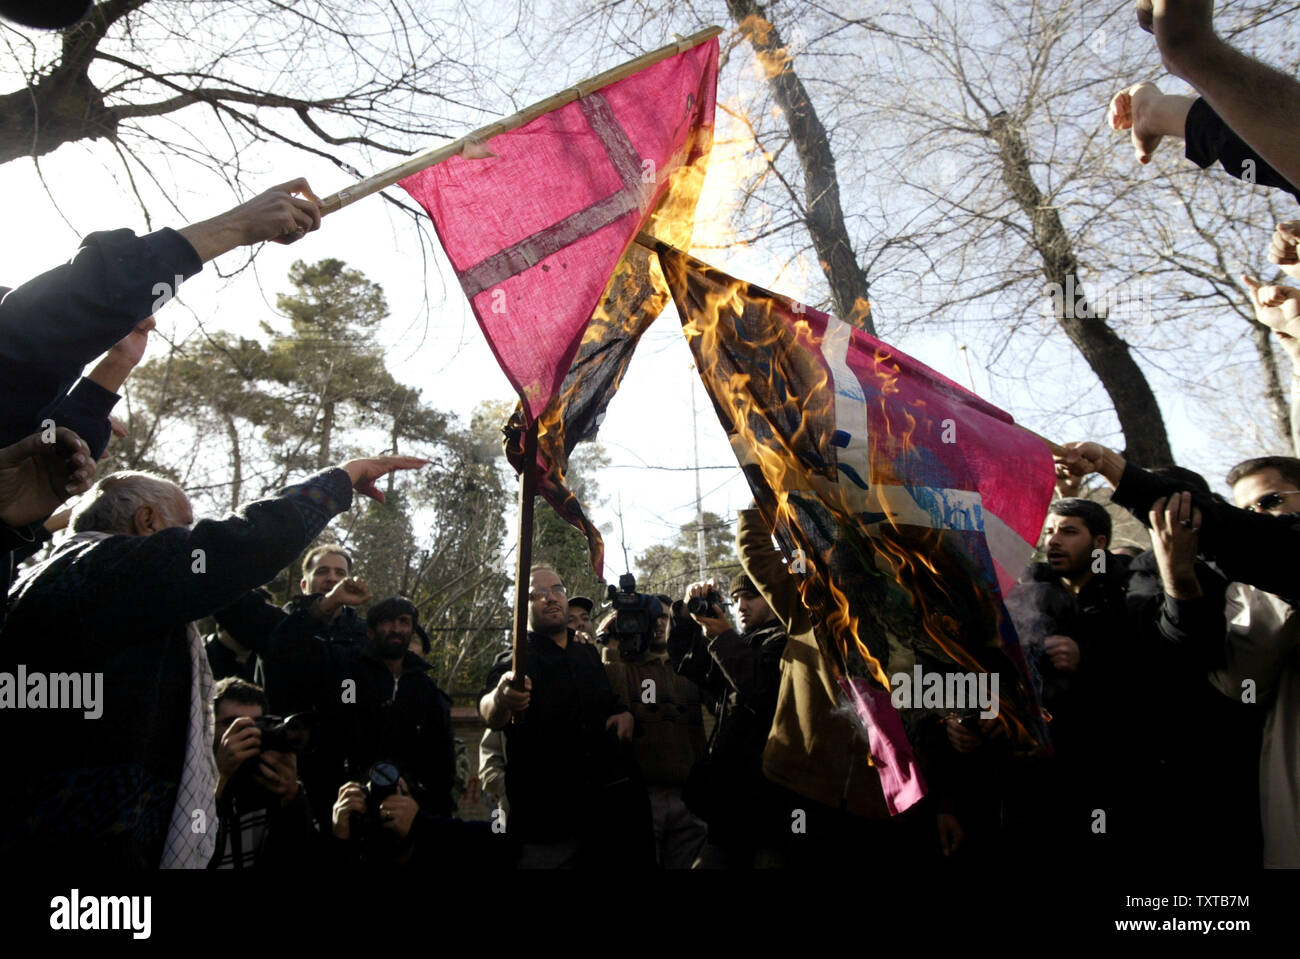 Members of Iran's hardline Islamist Basij militia burn a Denmark flags during demonstration in front of the Danish Embassy to support Iran's nuclear program and to protest a Danish newspaper cartoon that is being received as an insult to the Prophet Mohammed, in Tehran, Iran, February 10, 2006.  (UPI Photo/Mohammad Kheirkhah) Stock Photo